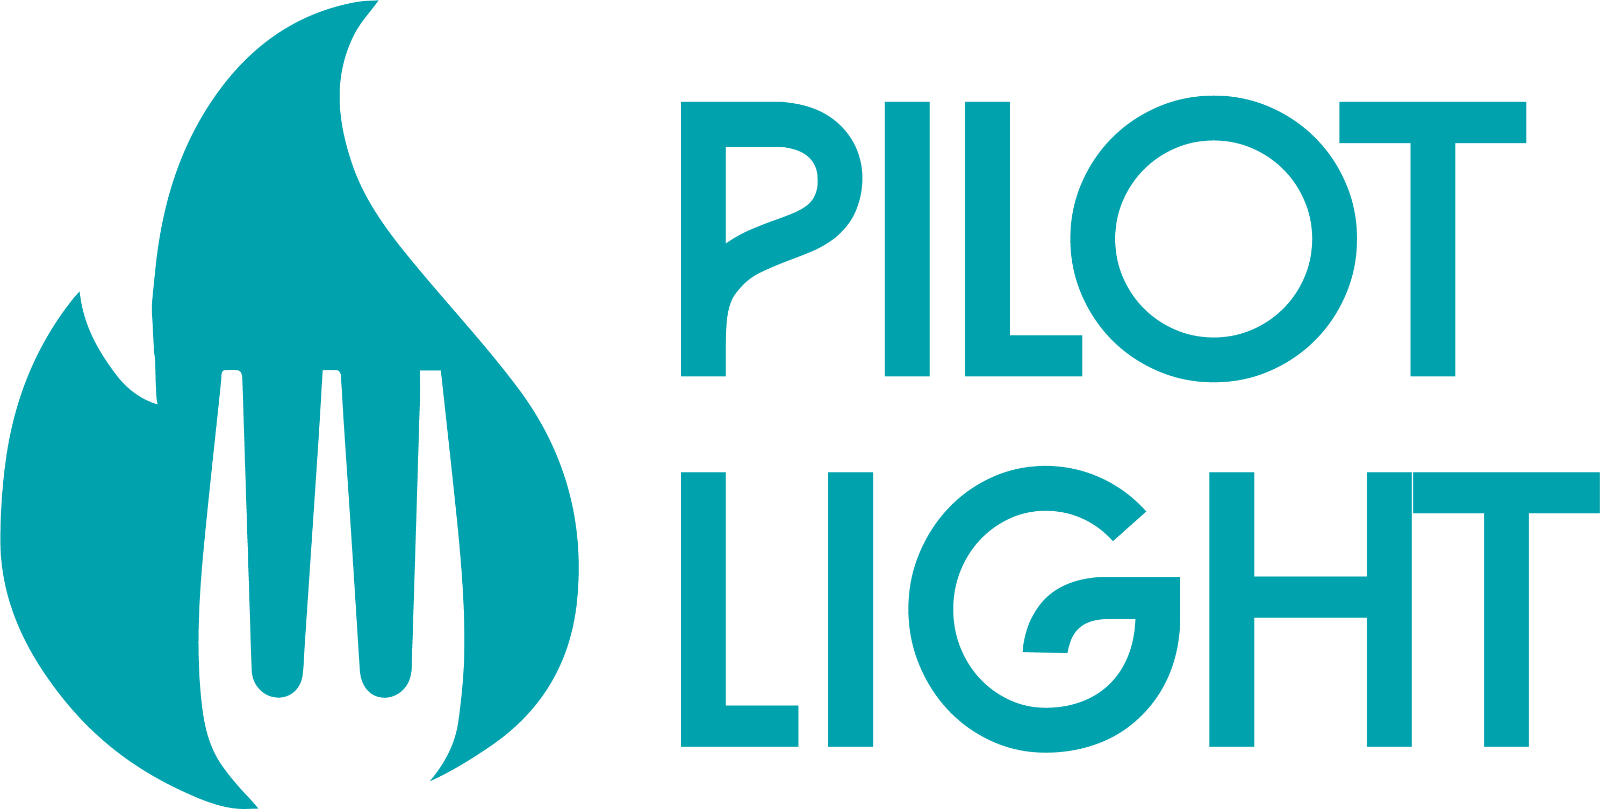 PilotLight-stack-turquoise(1).png